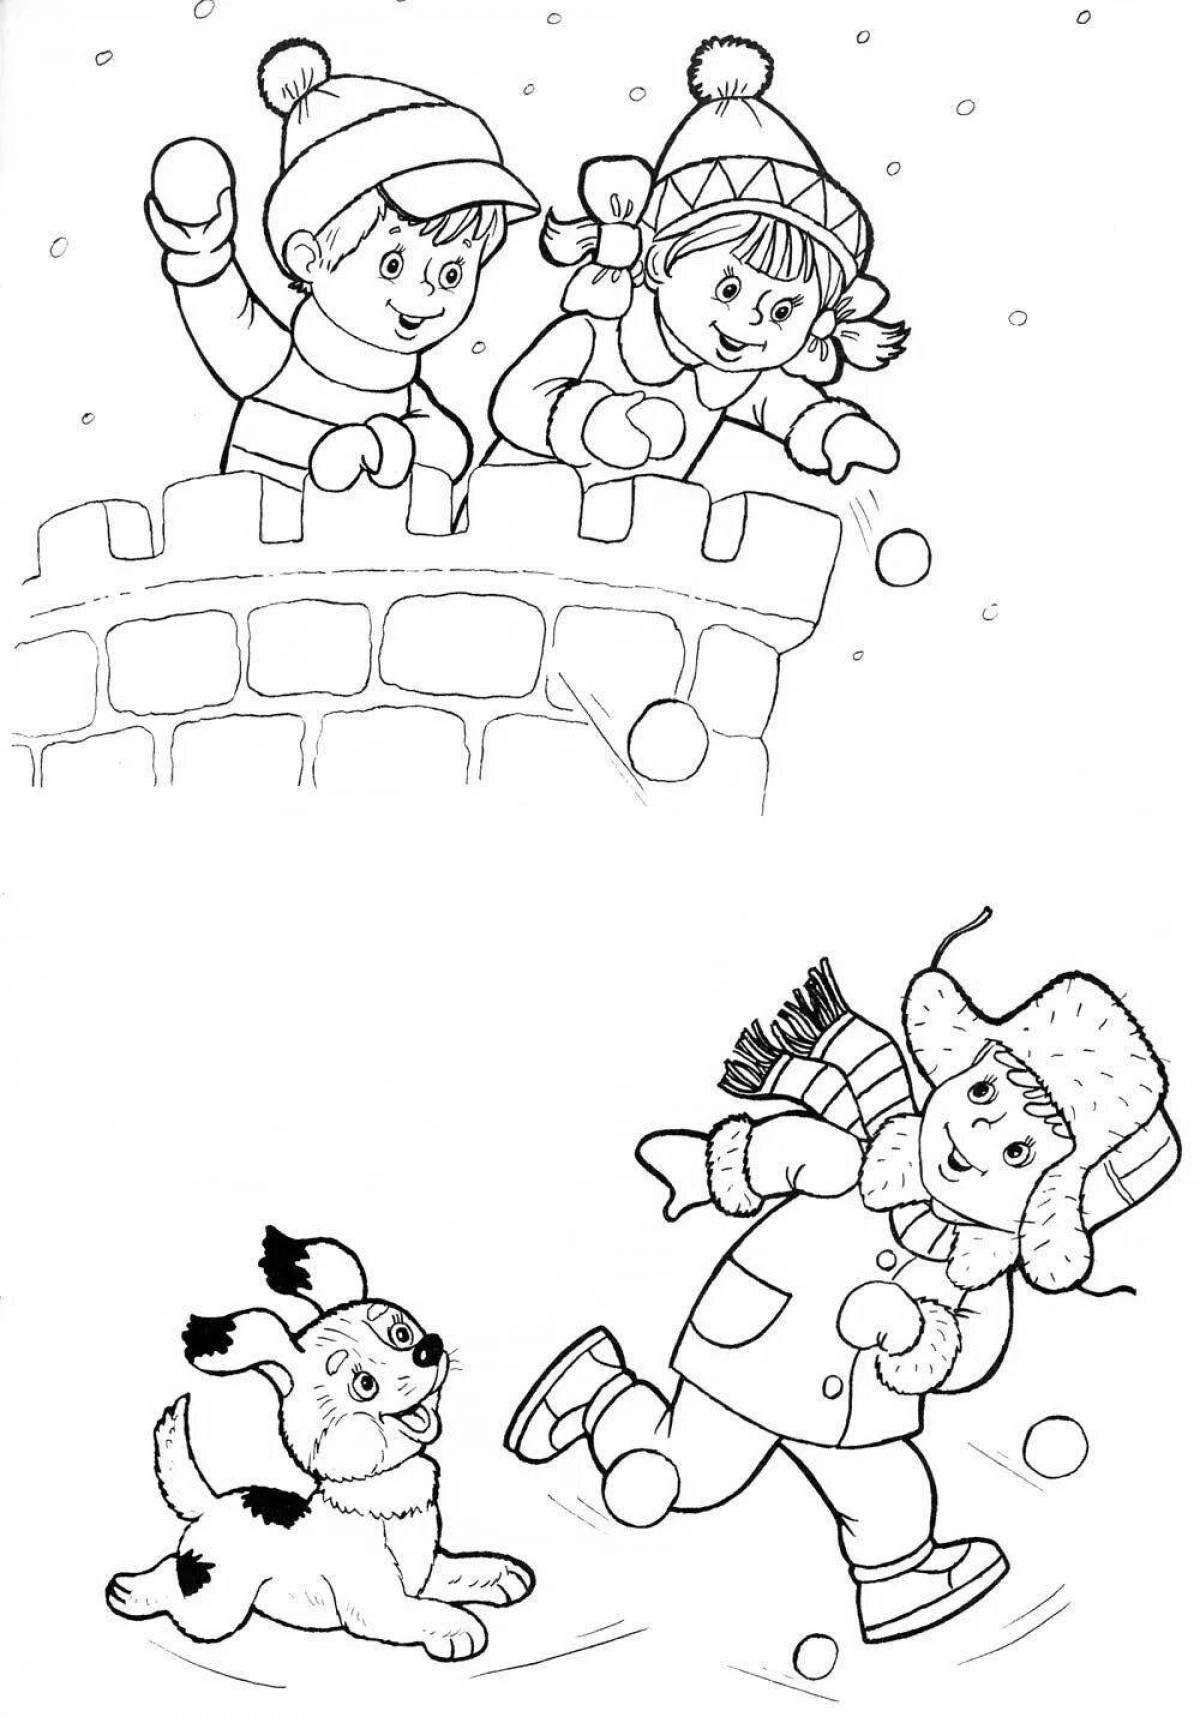 Adorable snow castle coloring book for kids